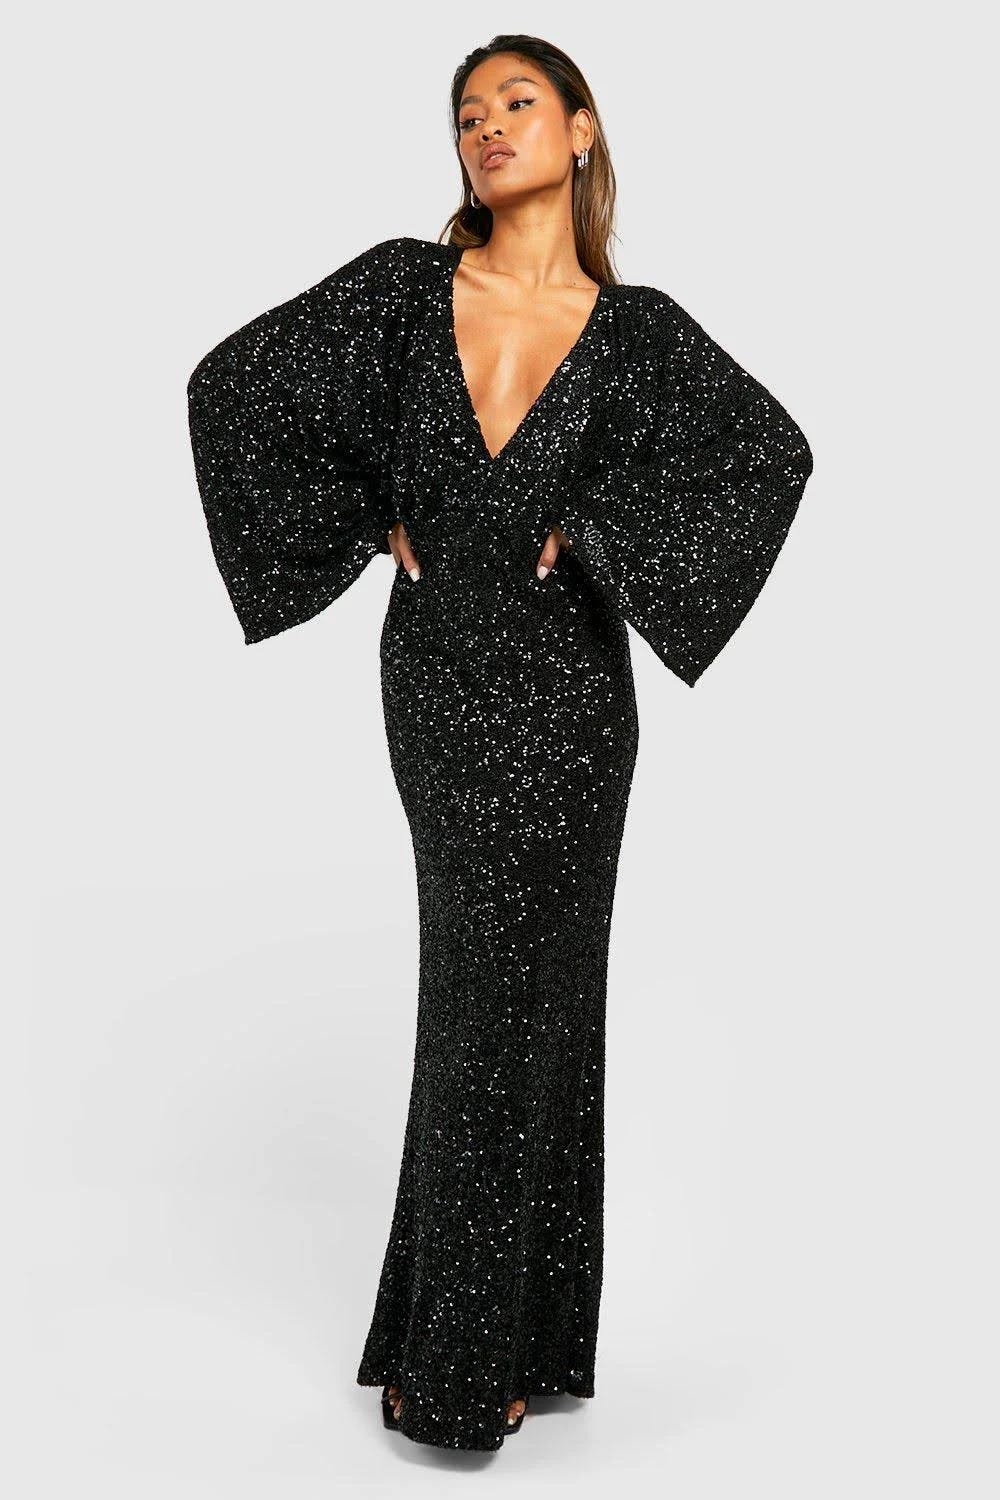 Black Sequin Maxi Dress with Angel Sleeves | Image